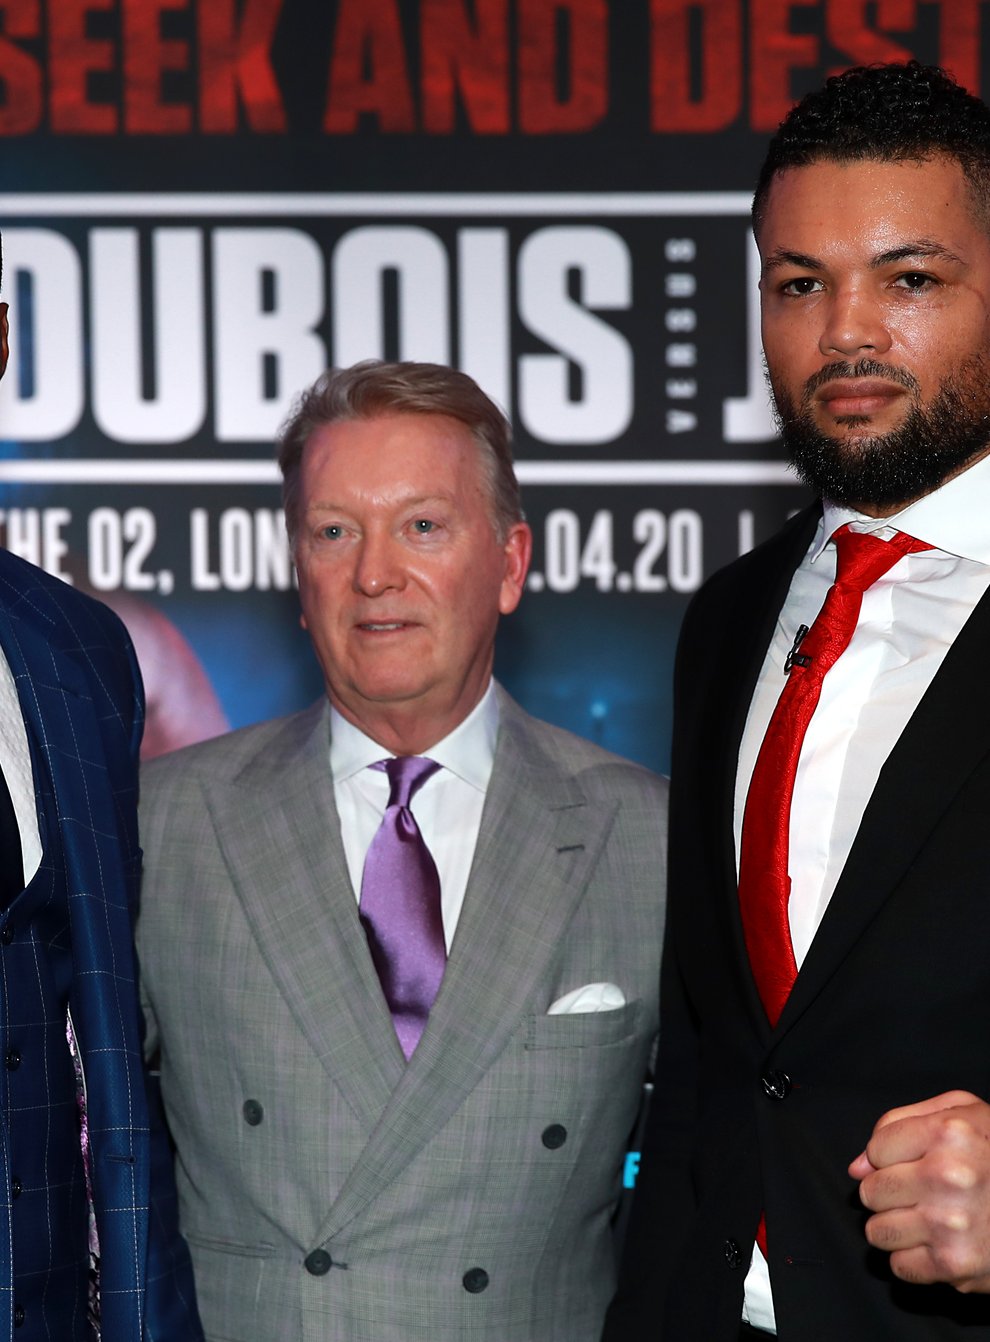 Warren promotes some of the best fighters in British boxing